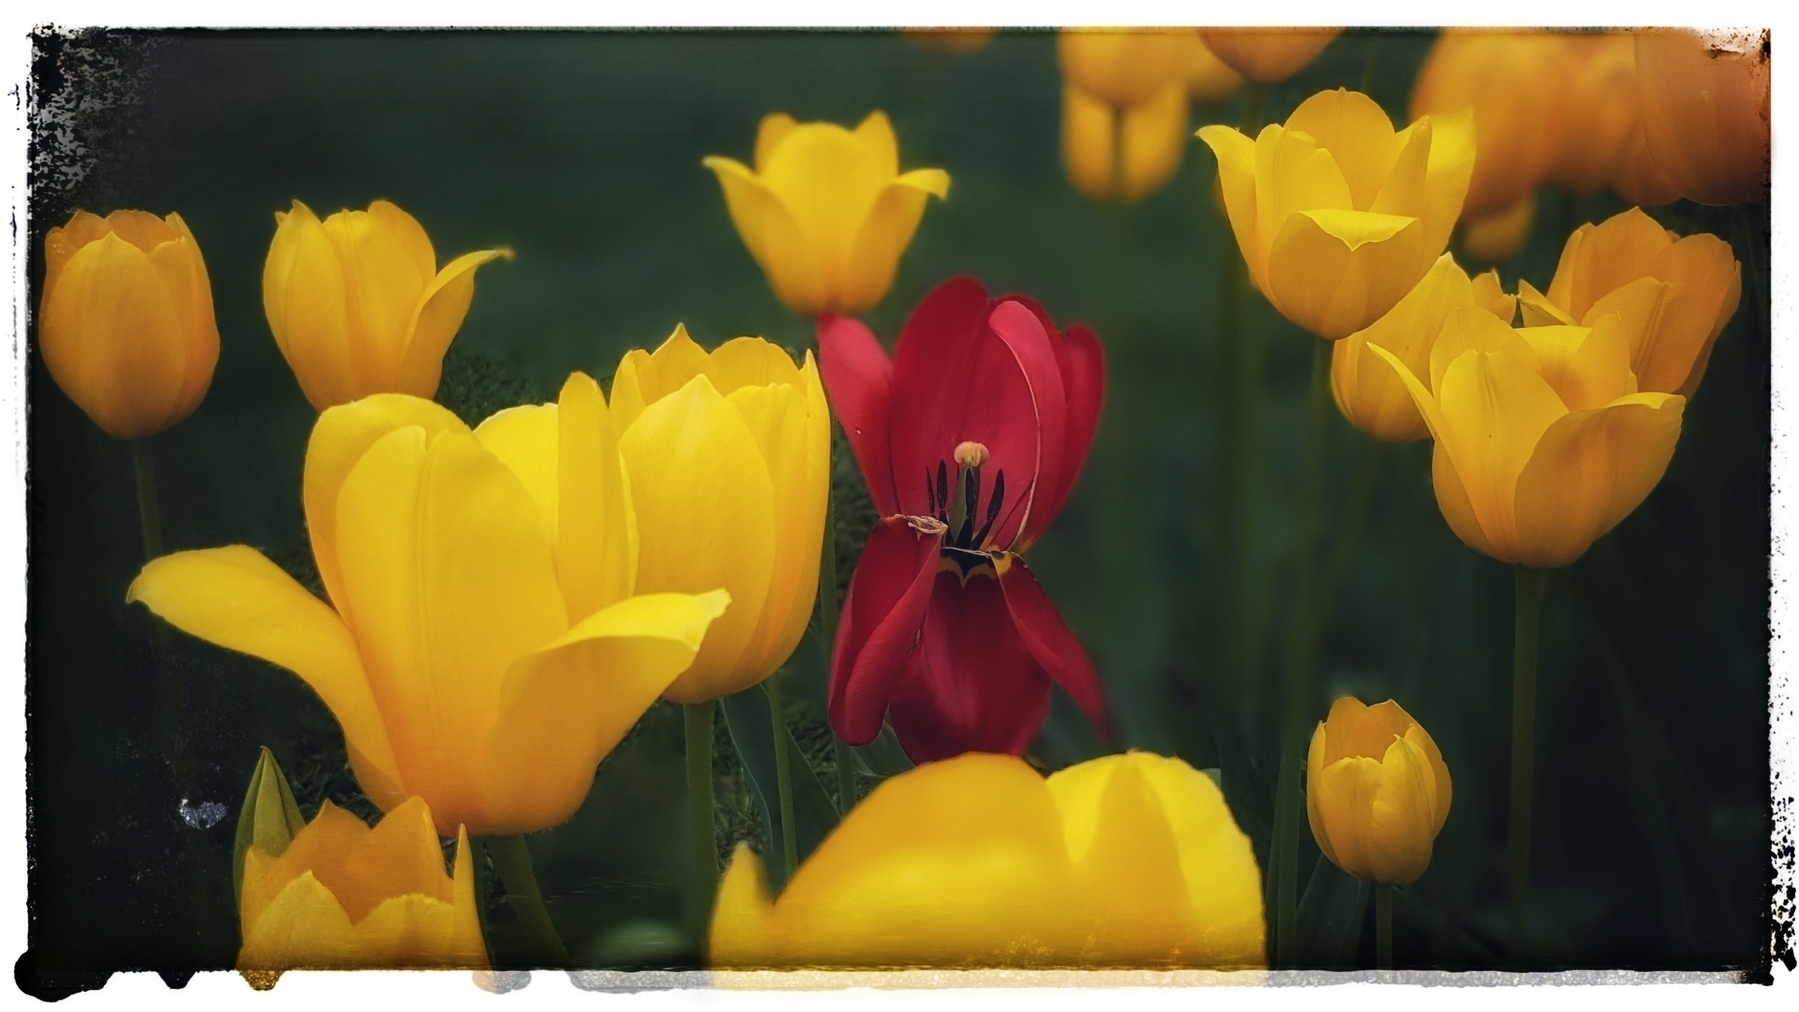 One open red tulip in a field of yellow tulips